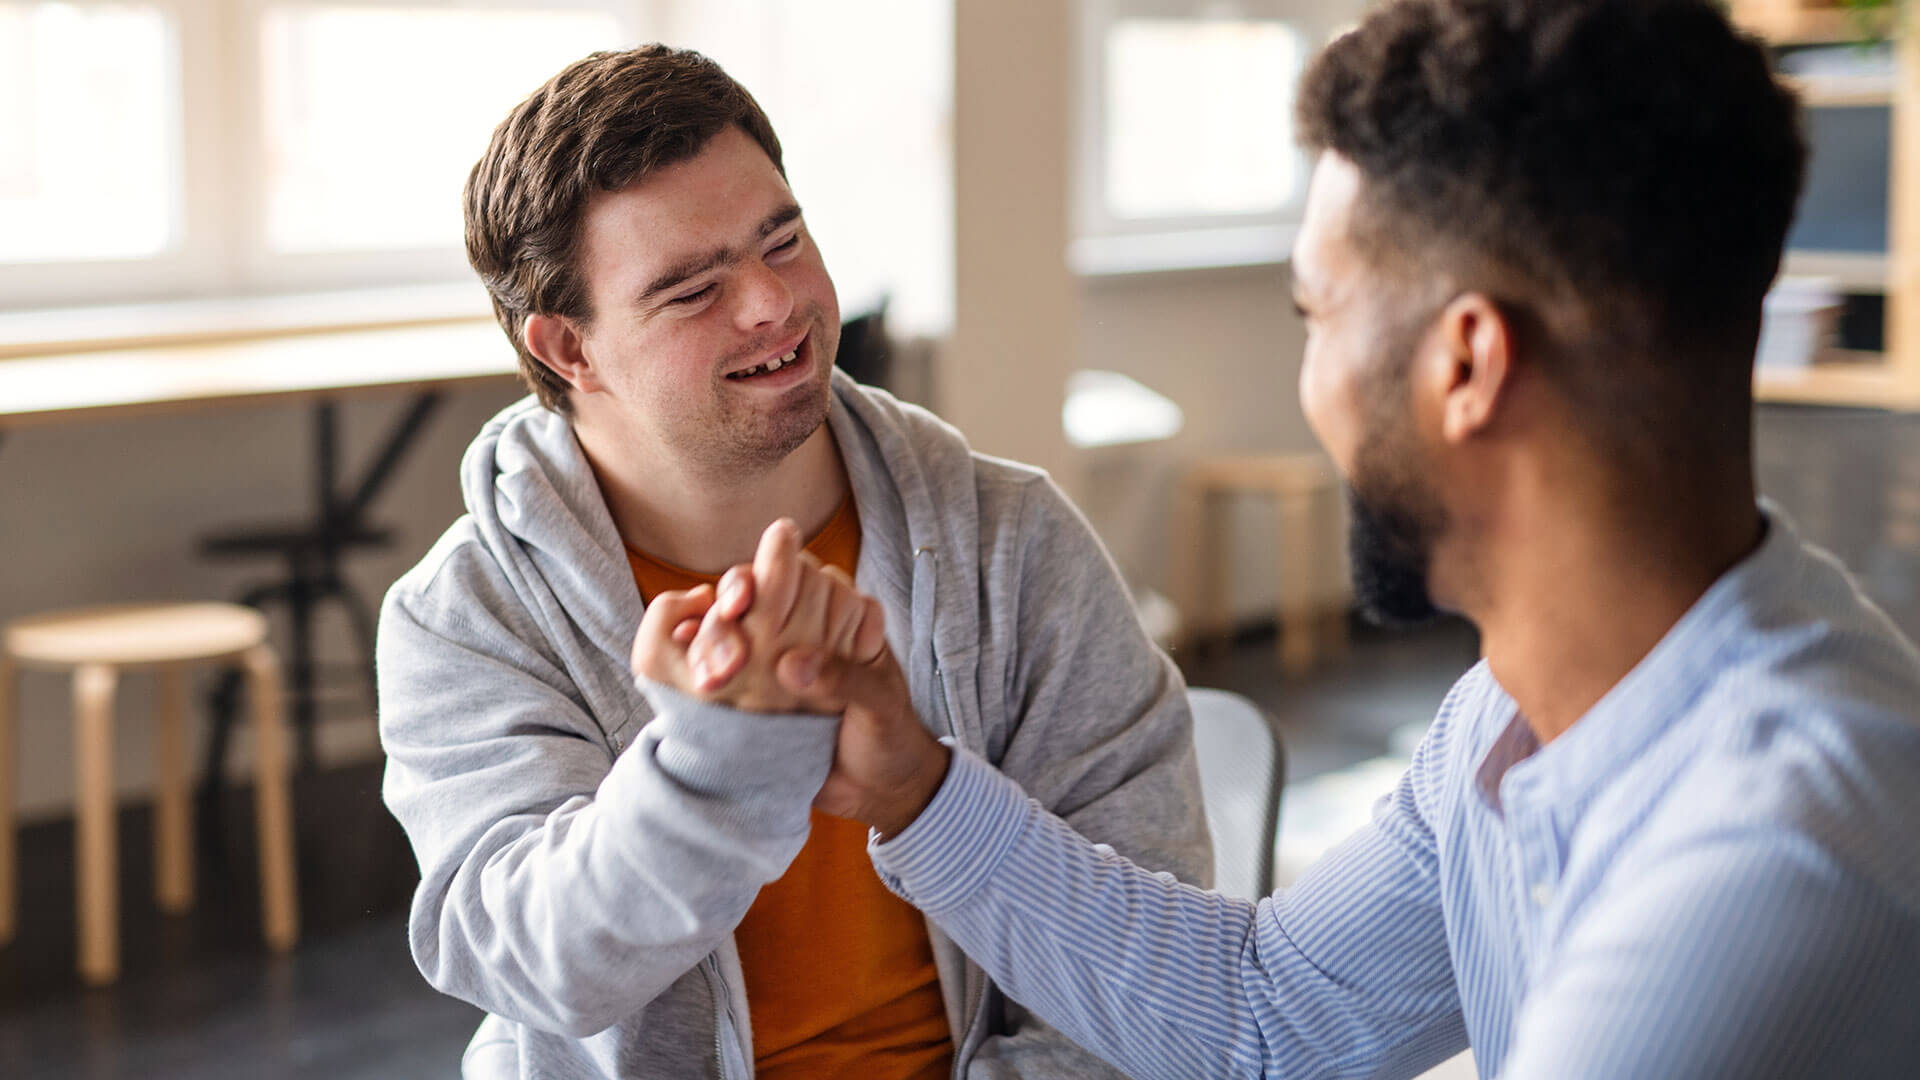 The Plus Sides of Becoming a NDIS Provider: A Disability Support Worker Shakes Hands With a Man With Downs Syndrome. The Two Men Are Smiling at Each Other.